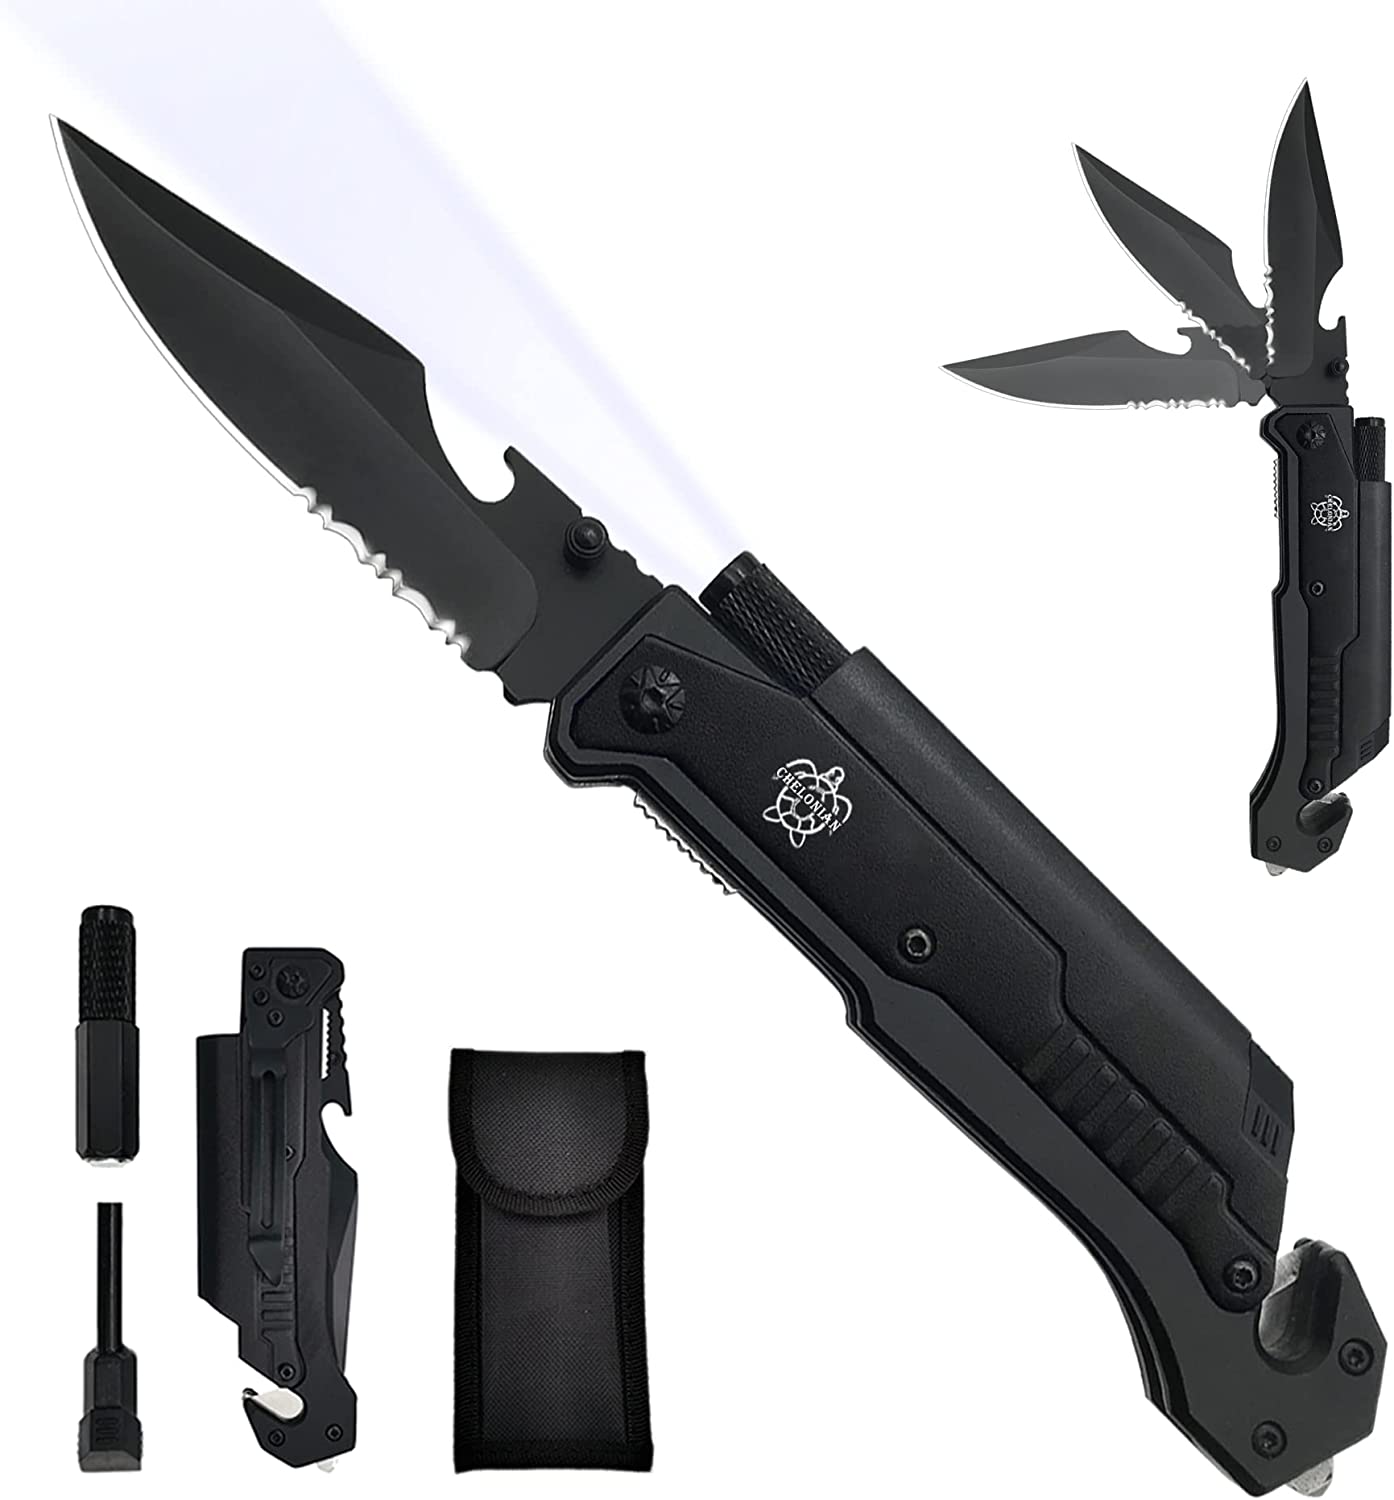 CHELONIAN 8.5" Military Outdoor Hunting Camping Pocket Knife, 7 in 1 Multi-Function Folding Knives with Fire Starter LED Light Seatbelt Cutter Glass Breaker Bottle Opener Tactical Blade (Black)